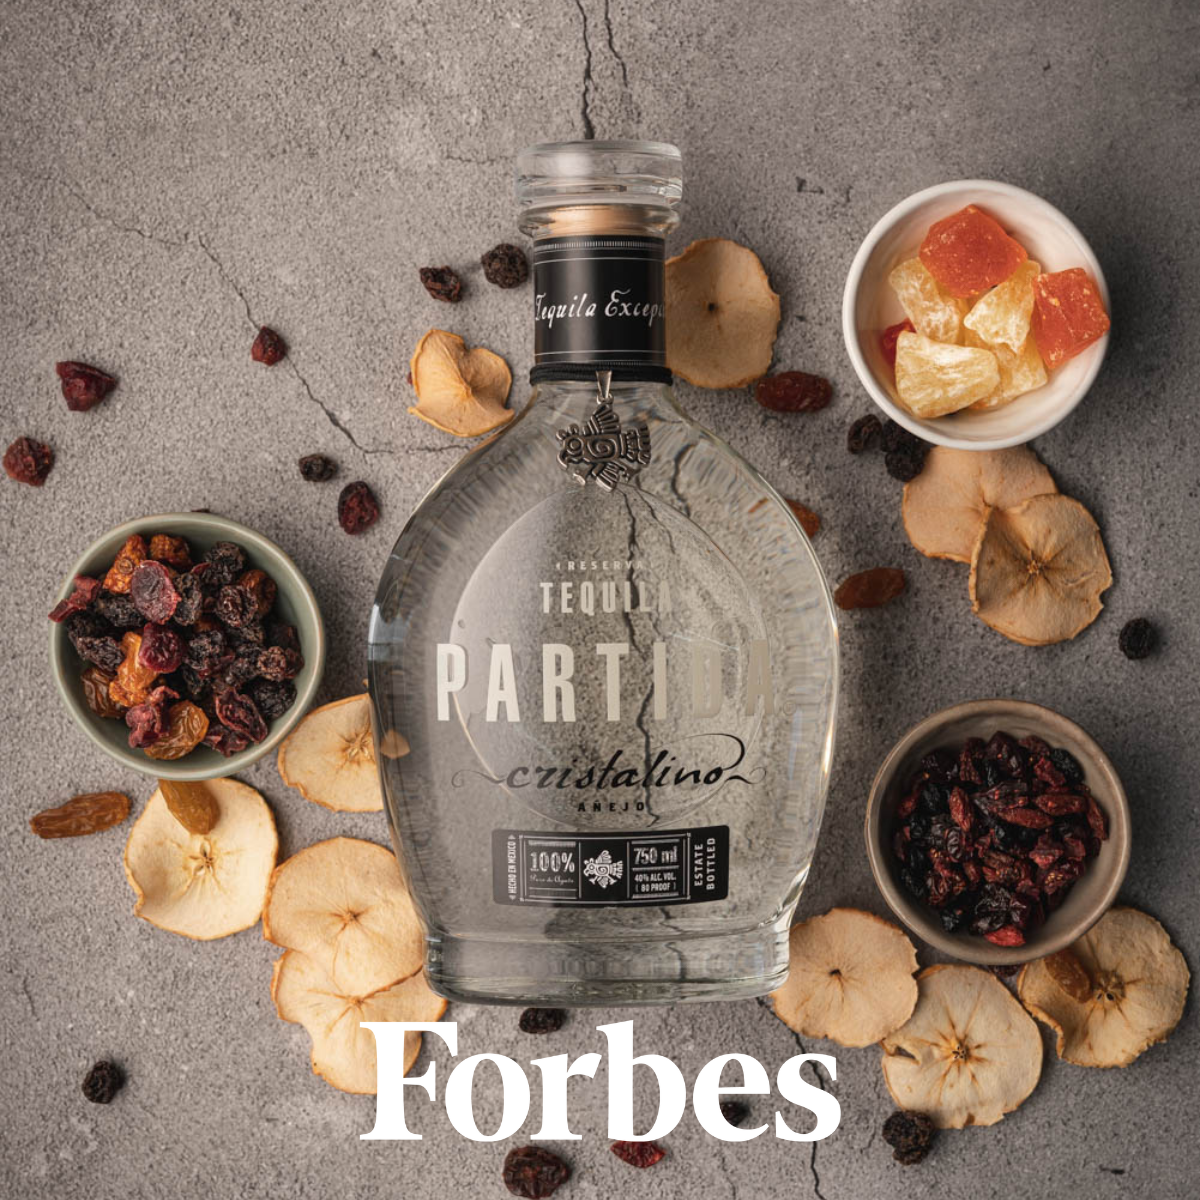 FORBES - Celebrate Cinco De Mayo With The Top Cristalino Tequilas